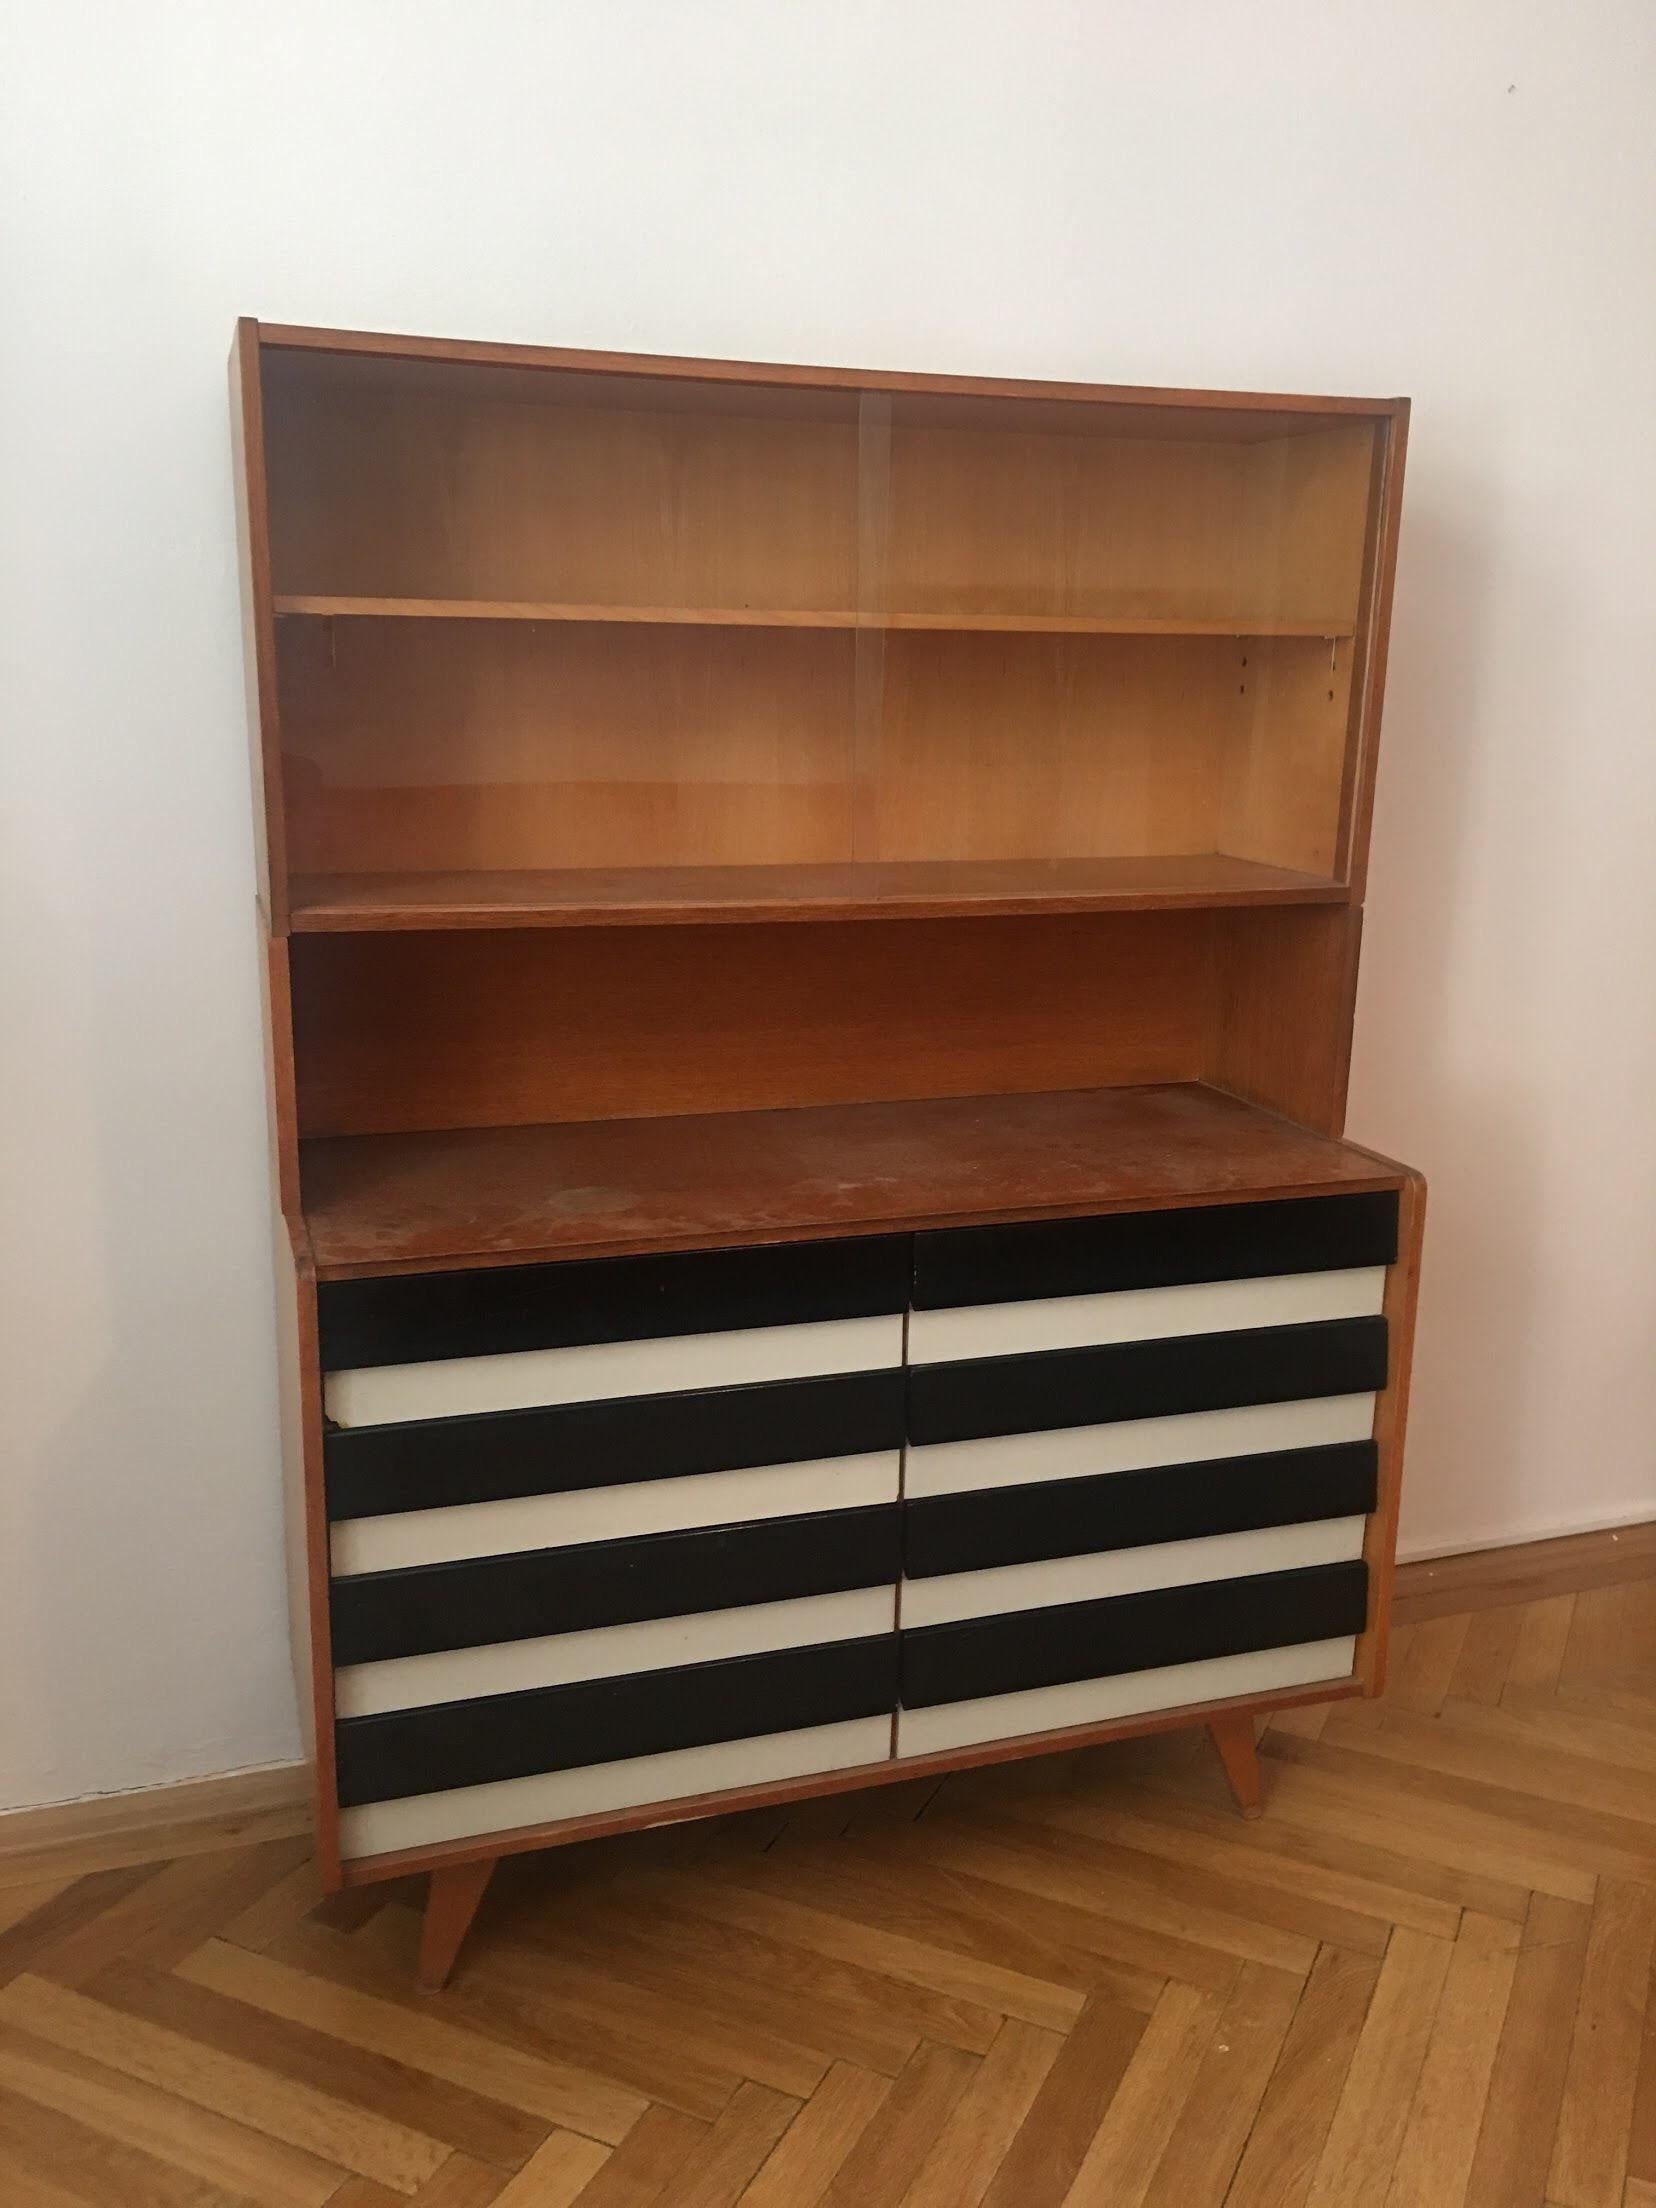 Czech Striped Sideboard with Bookcase U-453 by Jiri Jiroutek for Interier Praha, 1960s For Sale